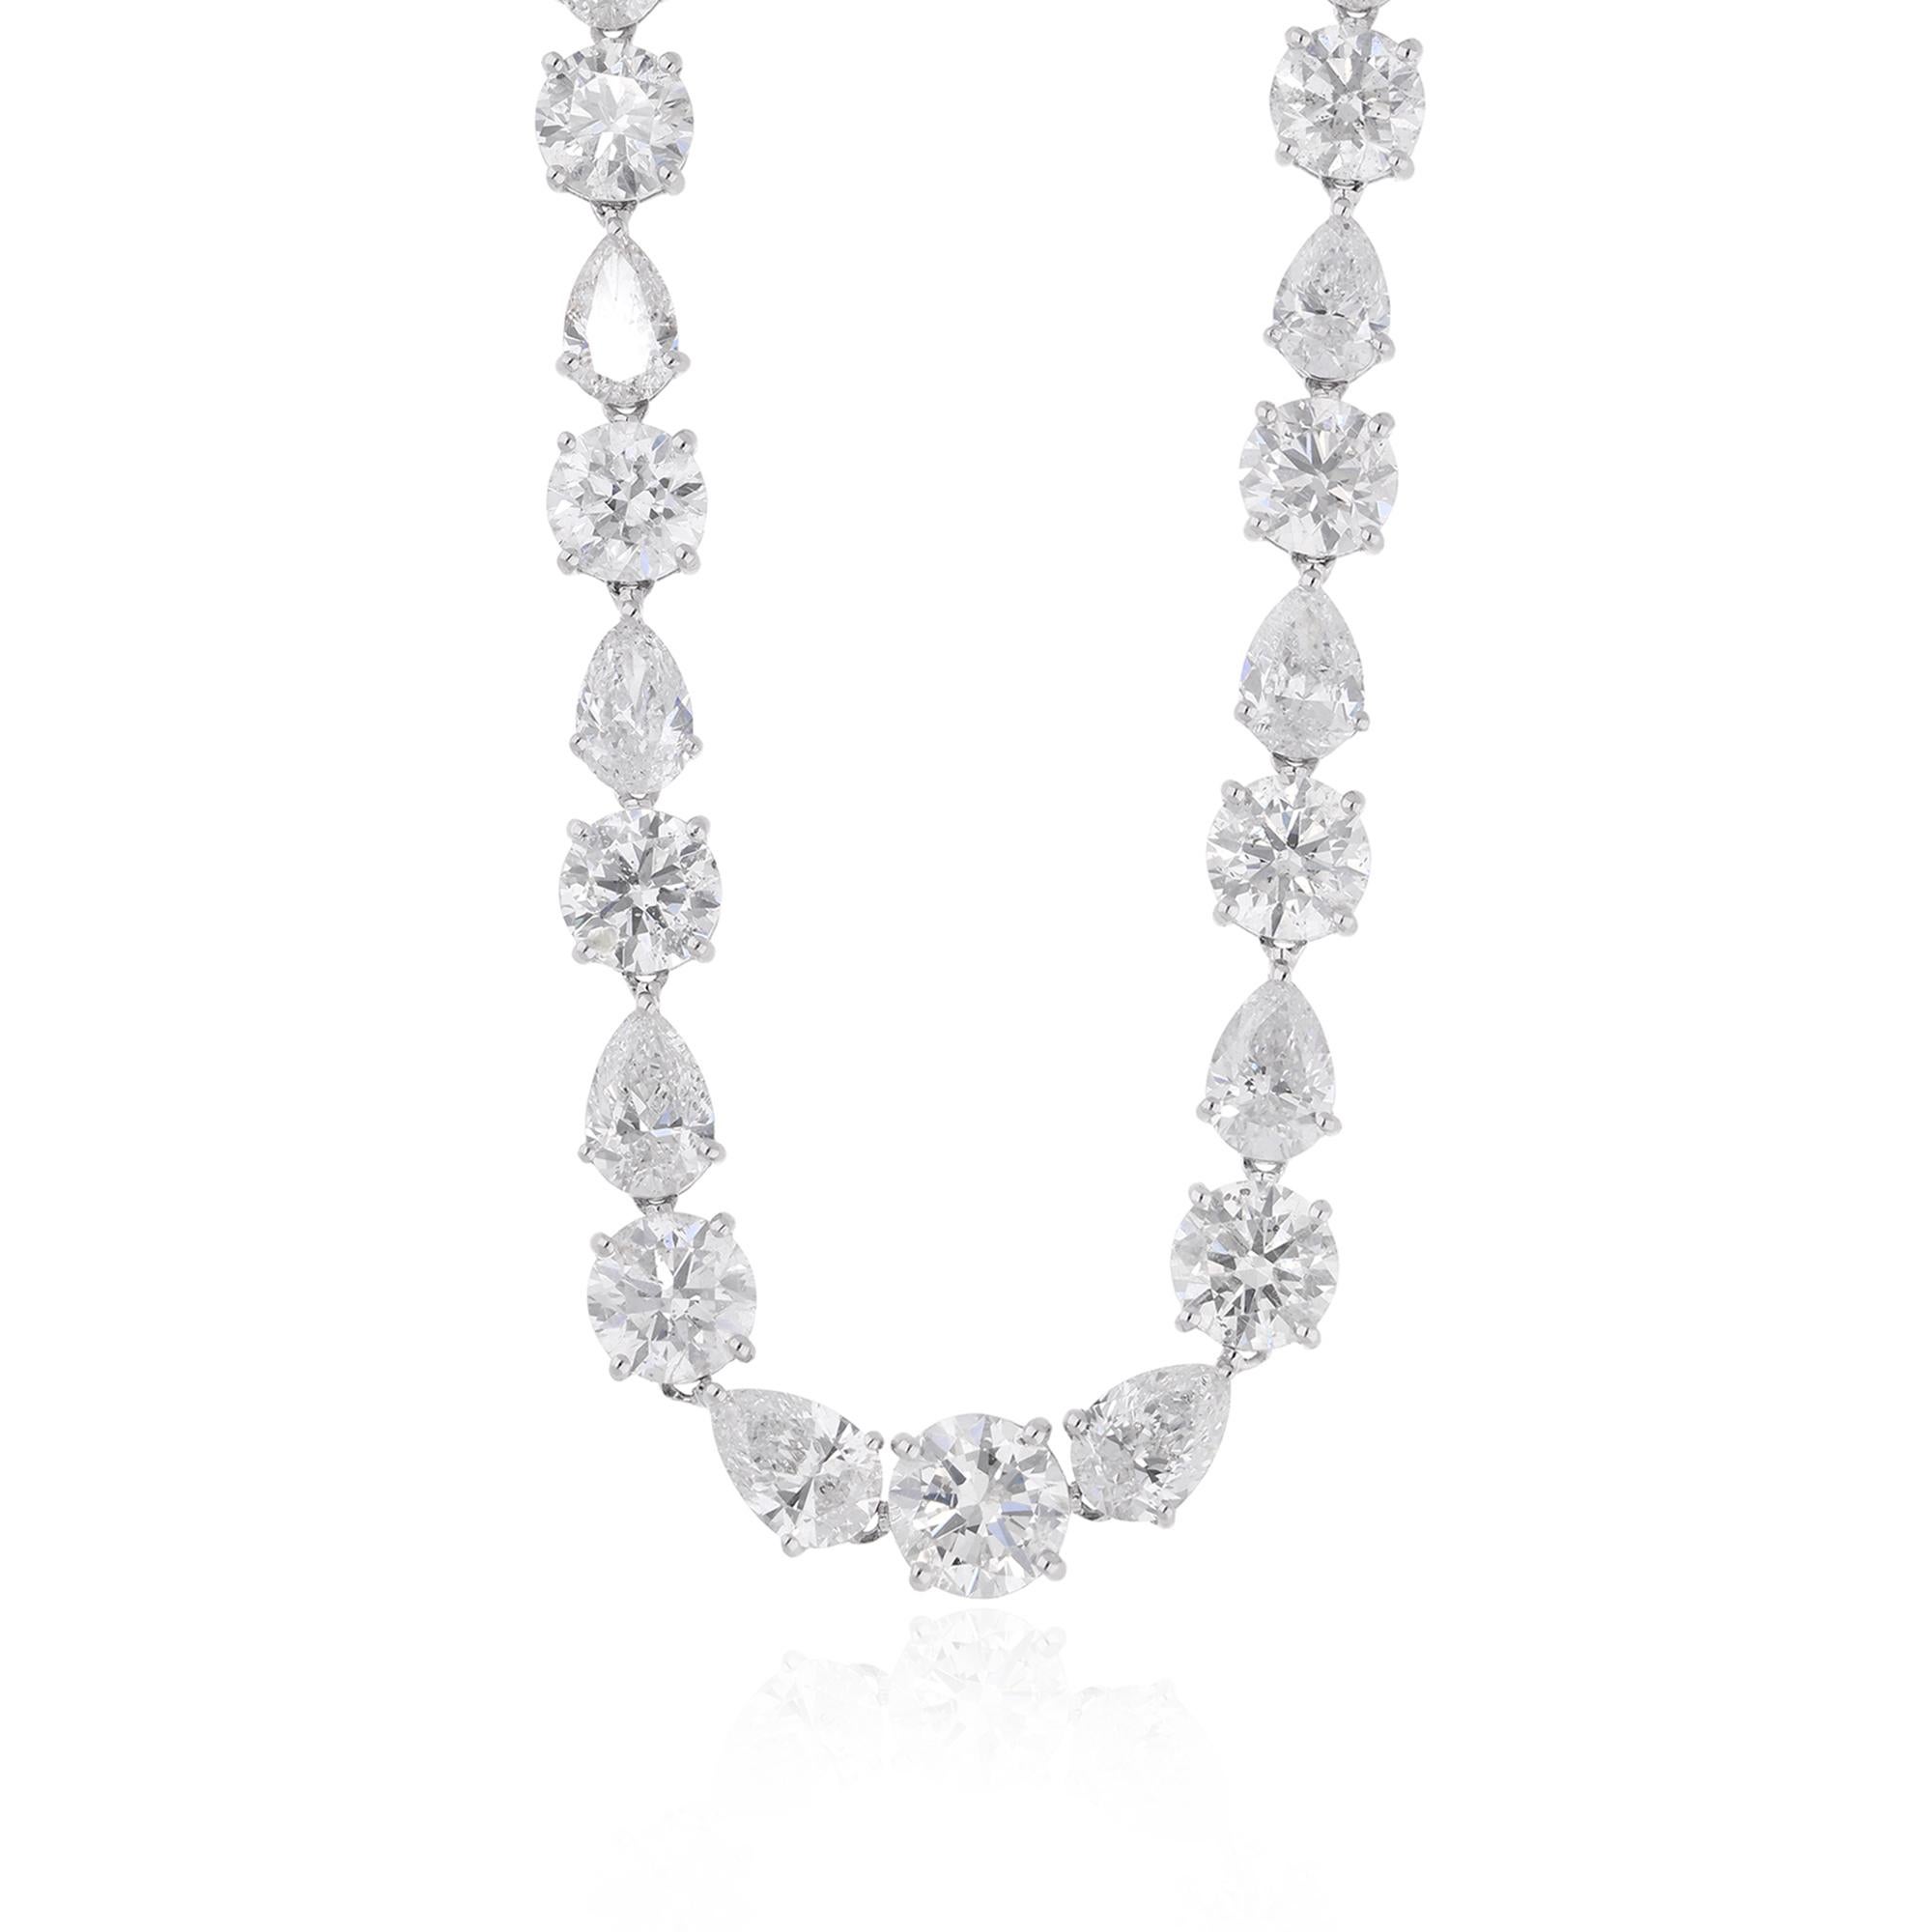 Crafted with meticulous attention to detail, the necklace is set in solid 14 karat white gold, providing a luxurious and enduring setting for the exquisite diamonds. The intricate design of the necklace drapes gracefully around the neckline,